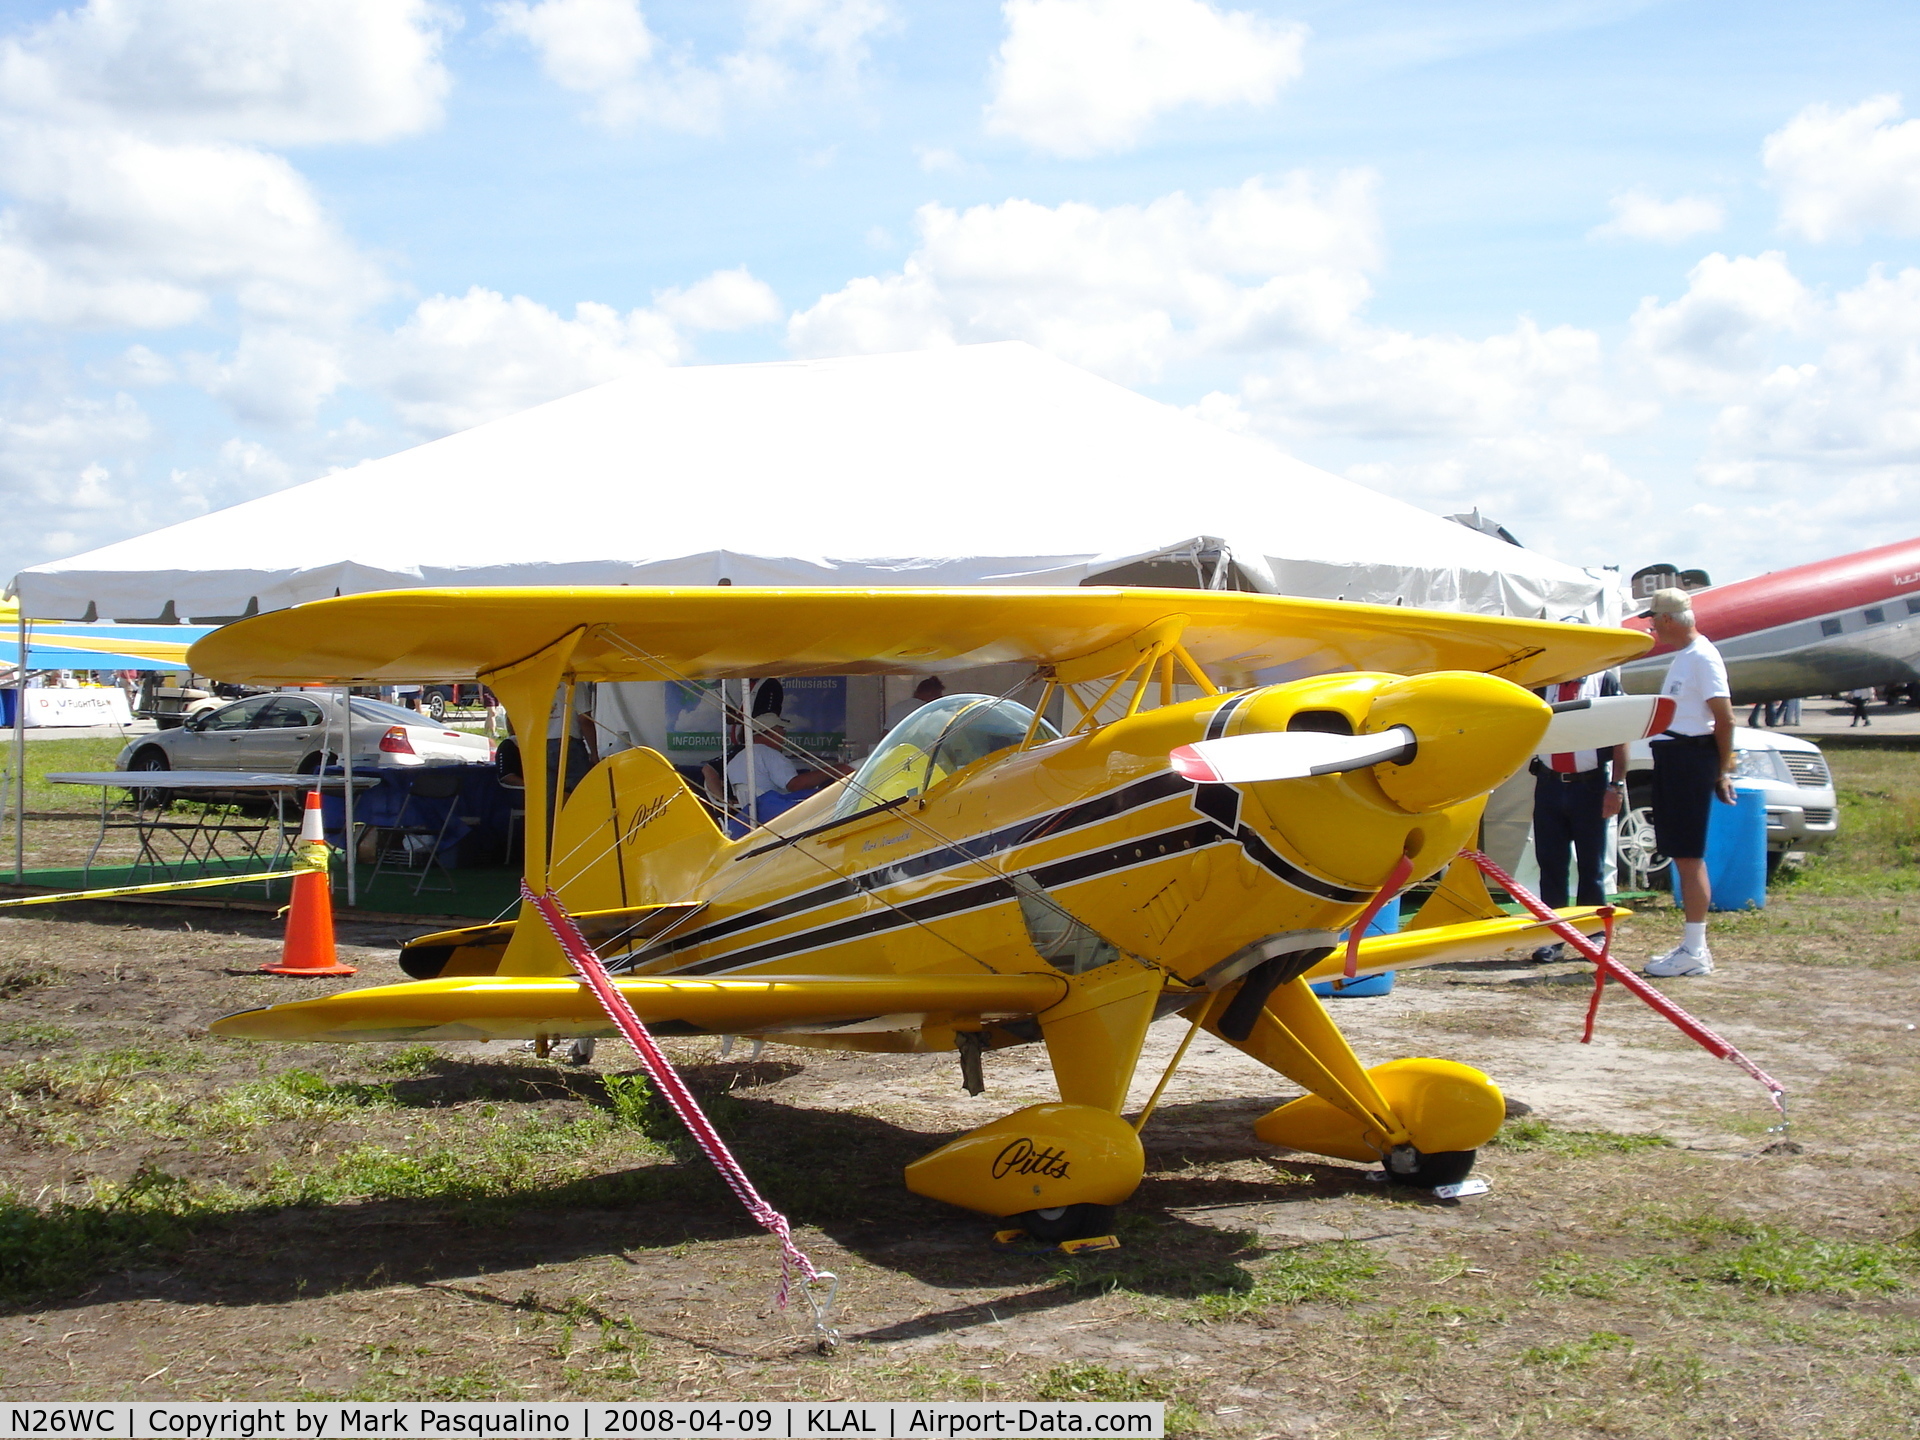 N26WC, Pitts S-1S Special C/N 001 (N26WC), Pitts S-1-S